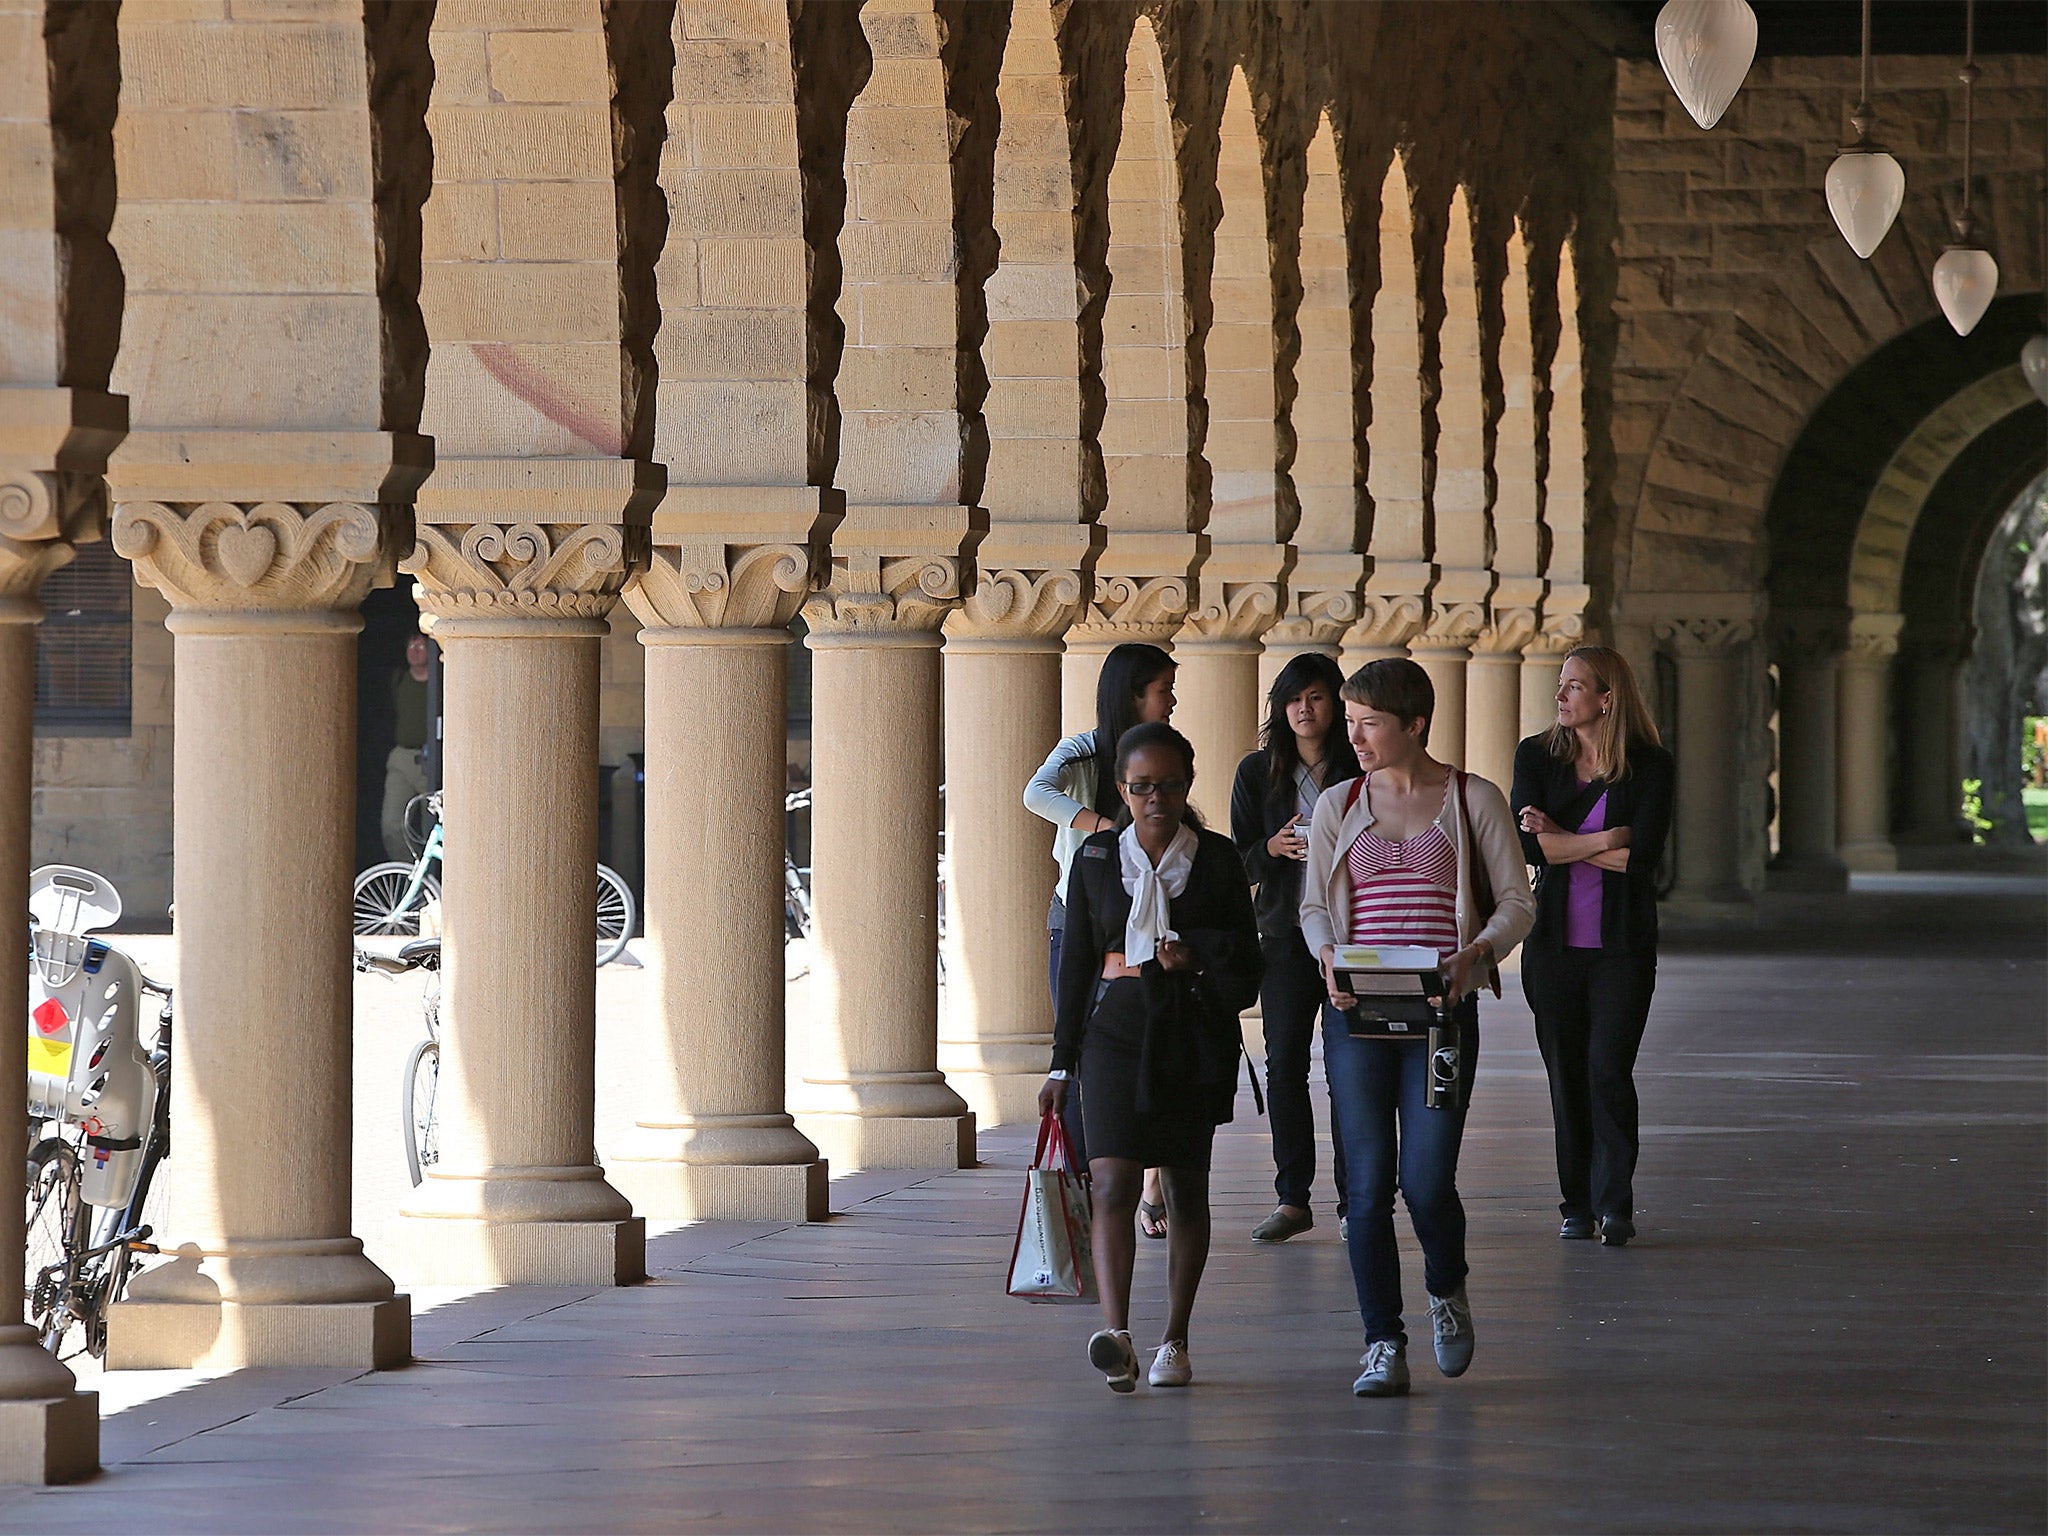 Stanford, in California, came top of a global list of universities to have fostered Nobel laureates